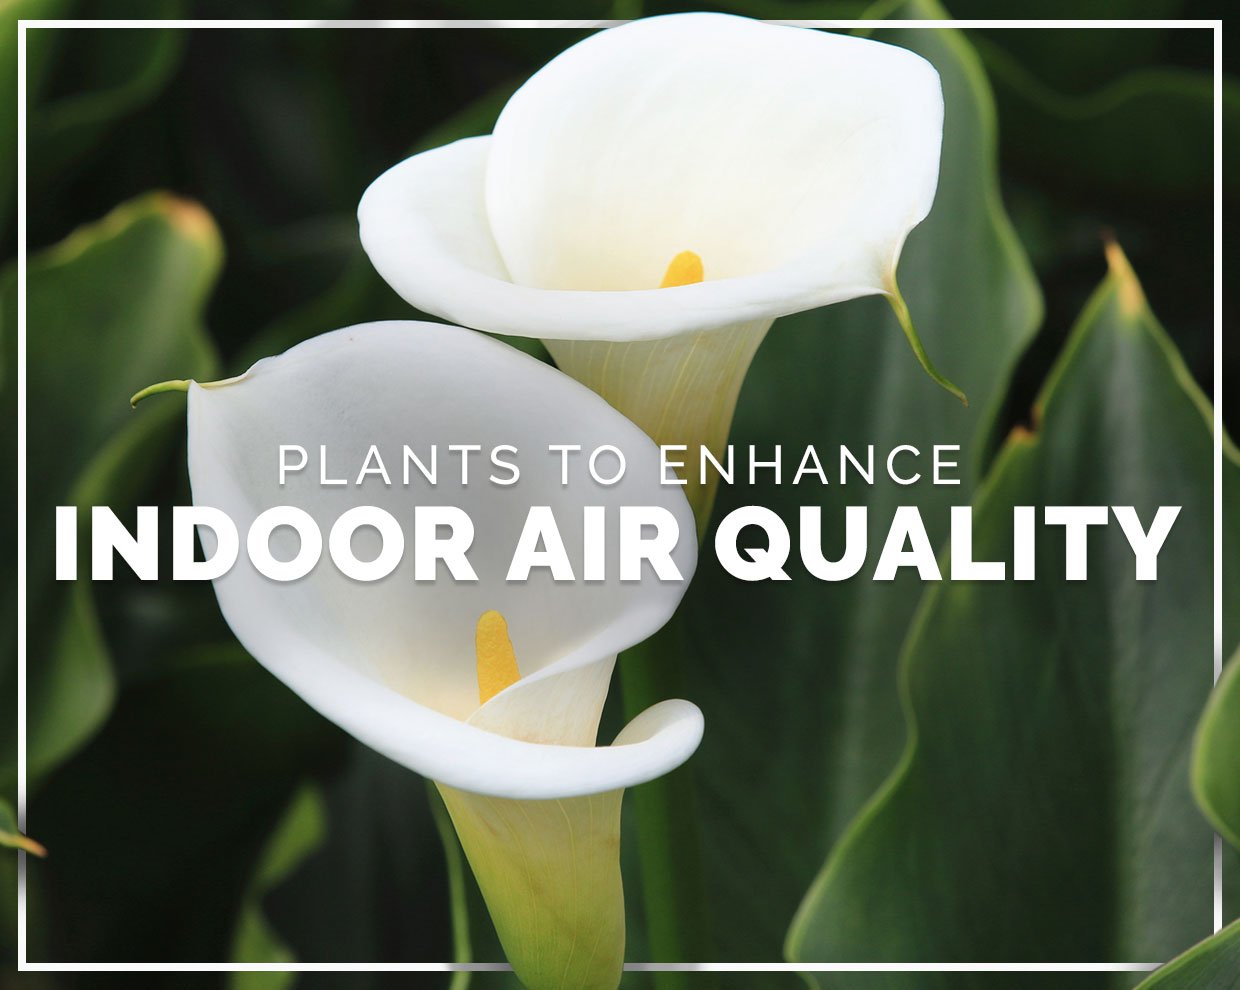 Plants to enhance your indoor air quality at home or work